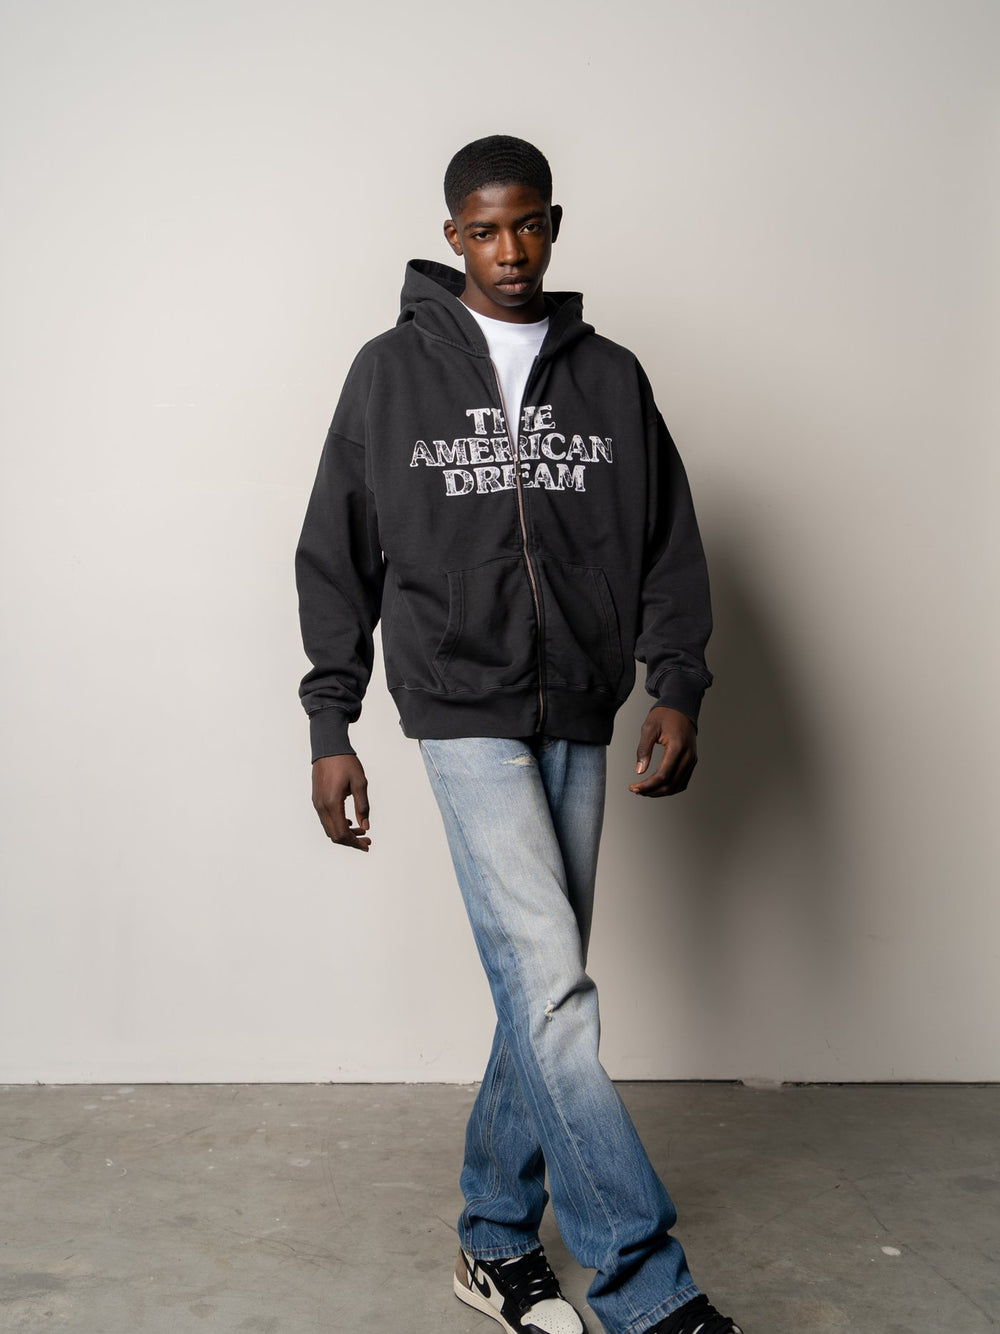 LORD AMERICAN DREAM ZIP UP